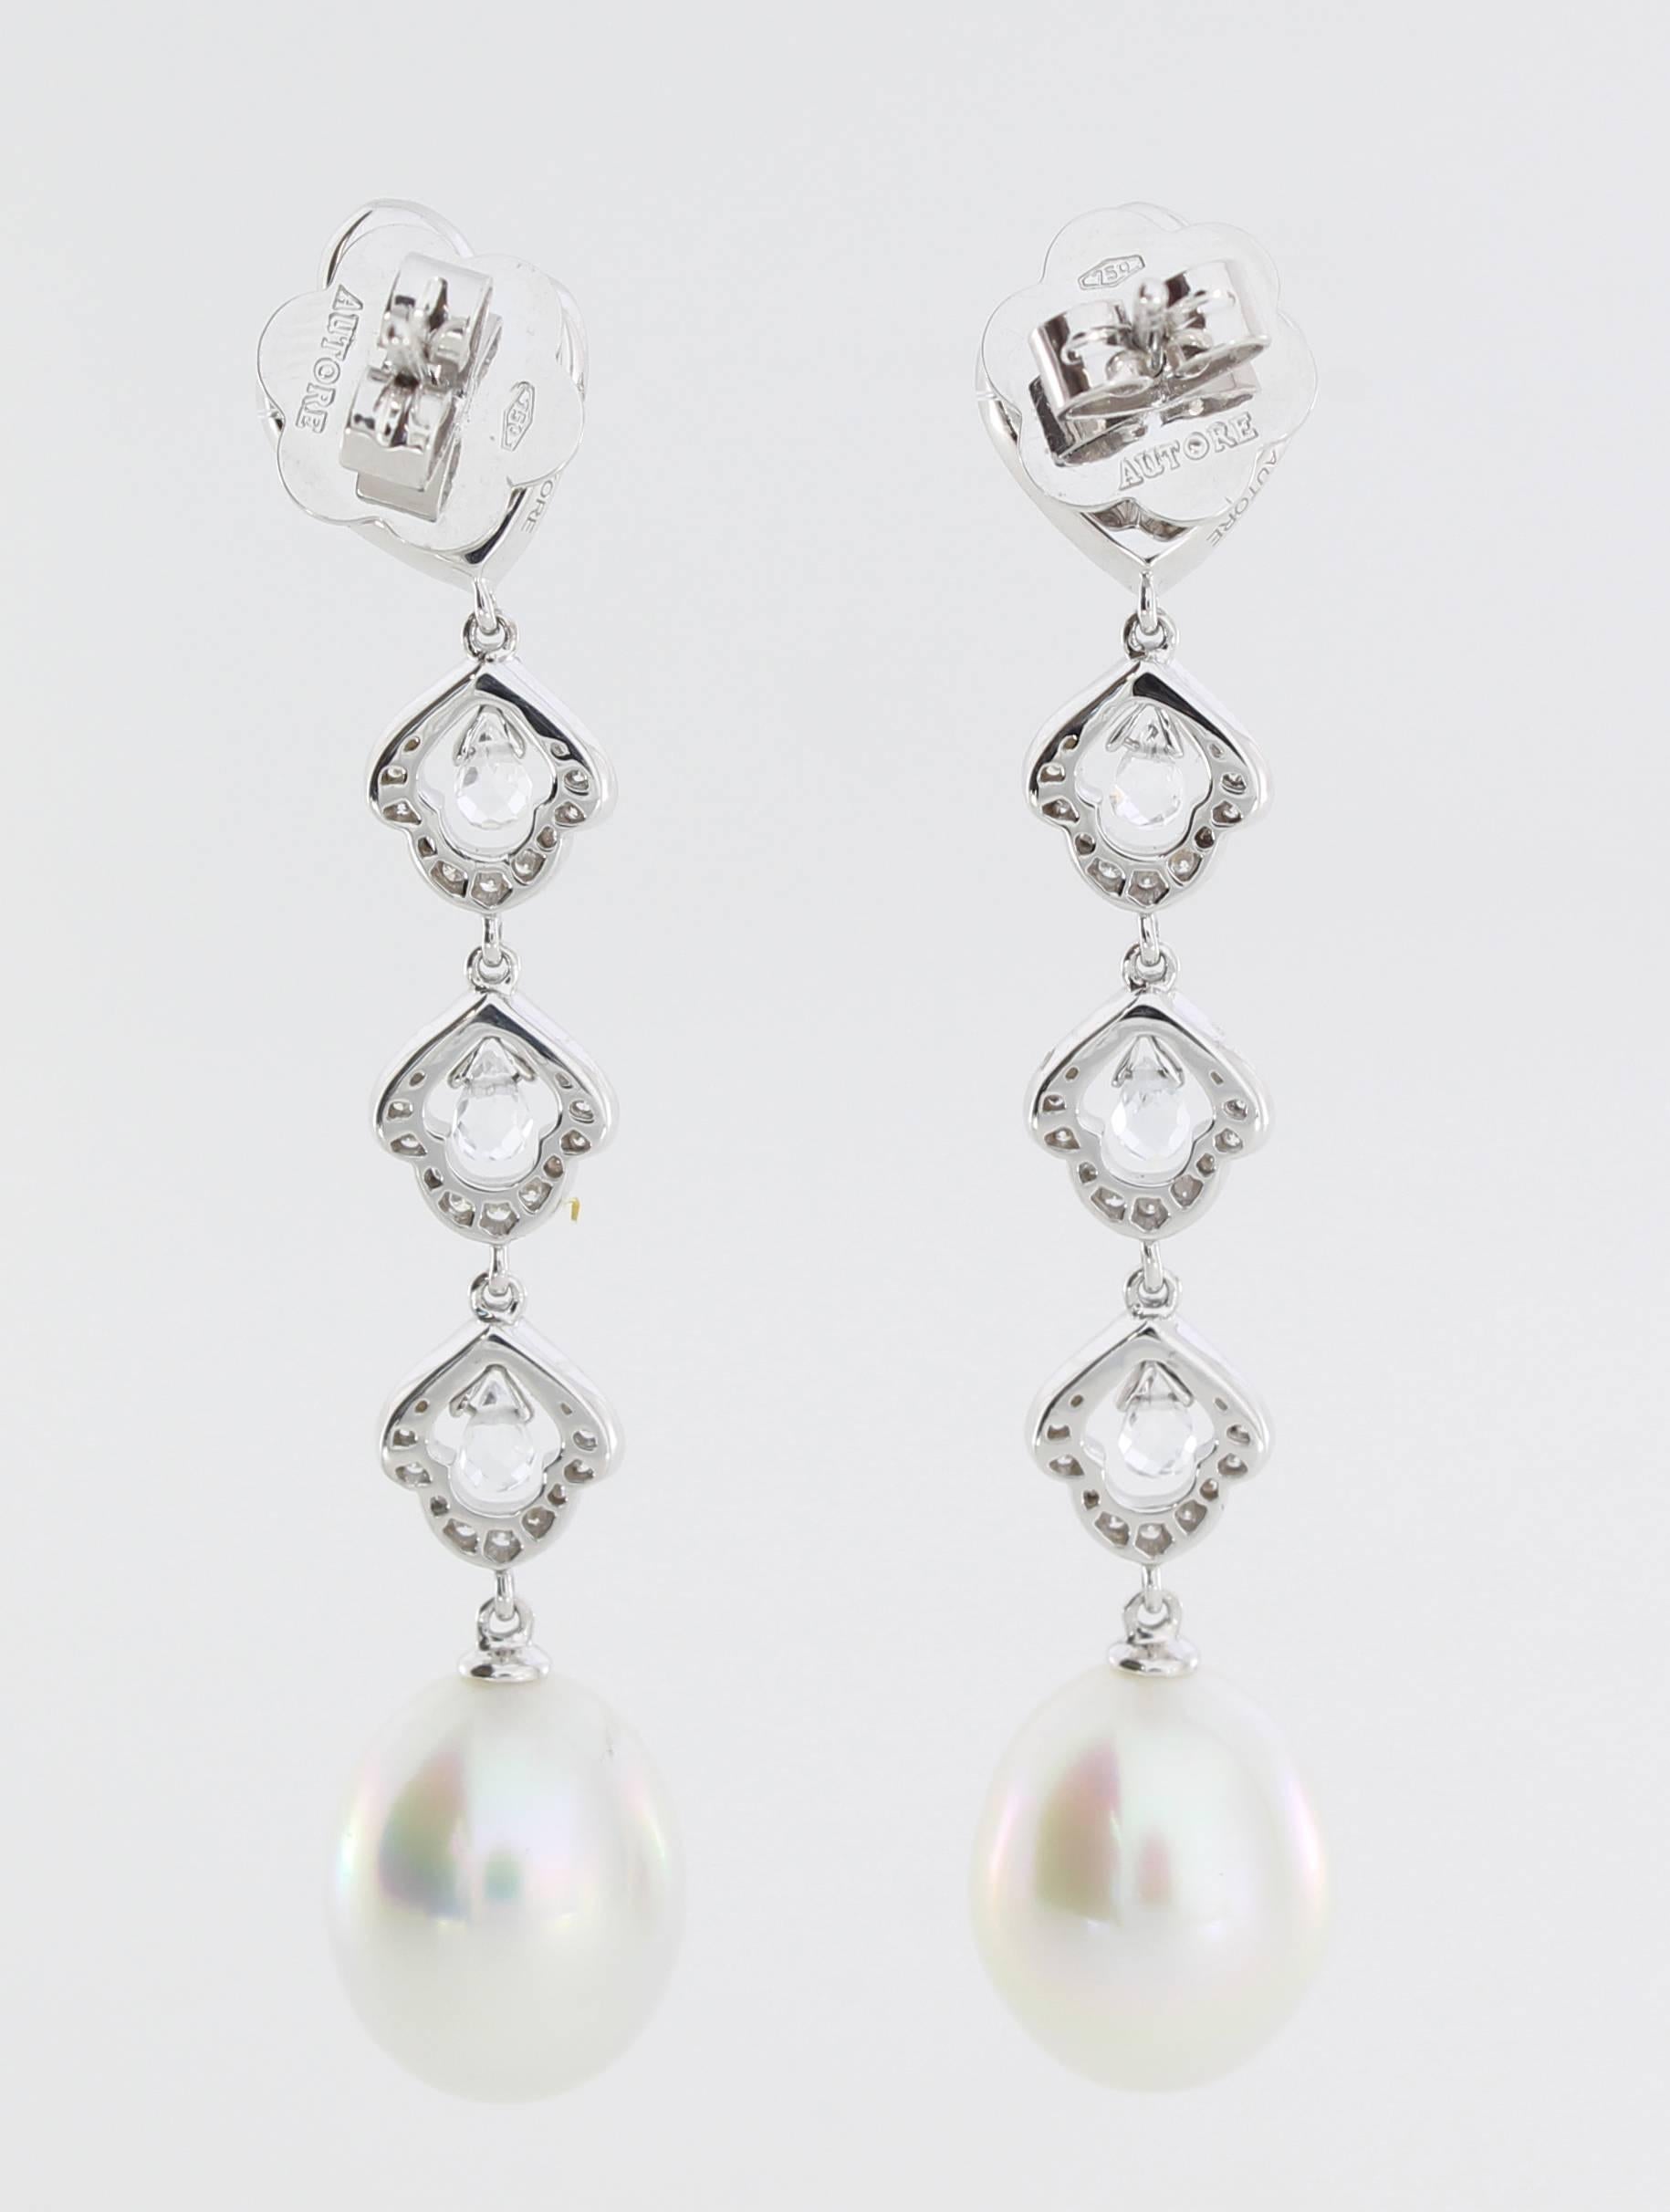 The Moondrop Earrings are from the AUTORE Stars & Galaxies Collection. 
This piece is crafted in 18k White Gold with White Diamonds (H SI 1.11ct Brilliant Cut), White Topaz (0.77ct Briolette Cut) and 11mm White Drop South Sea Pearls. 